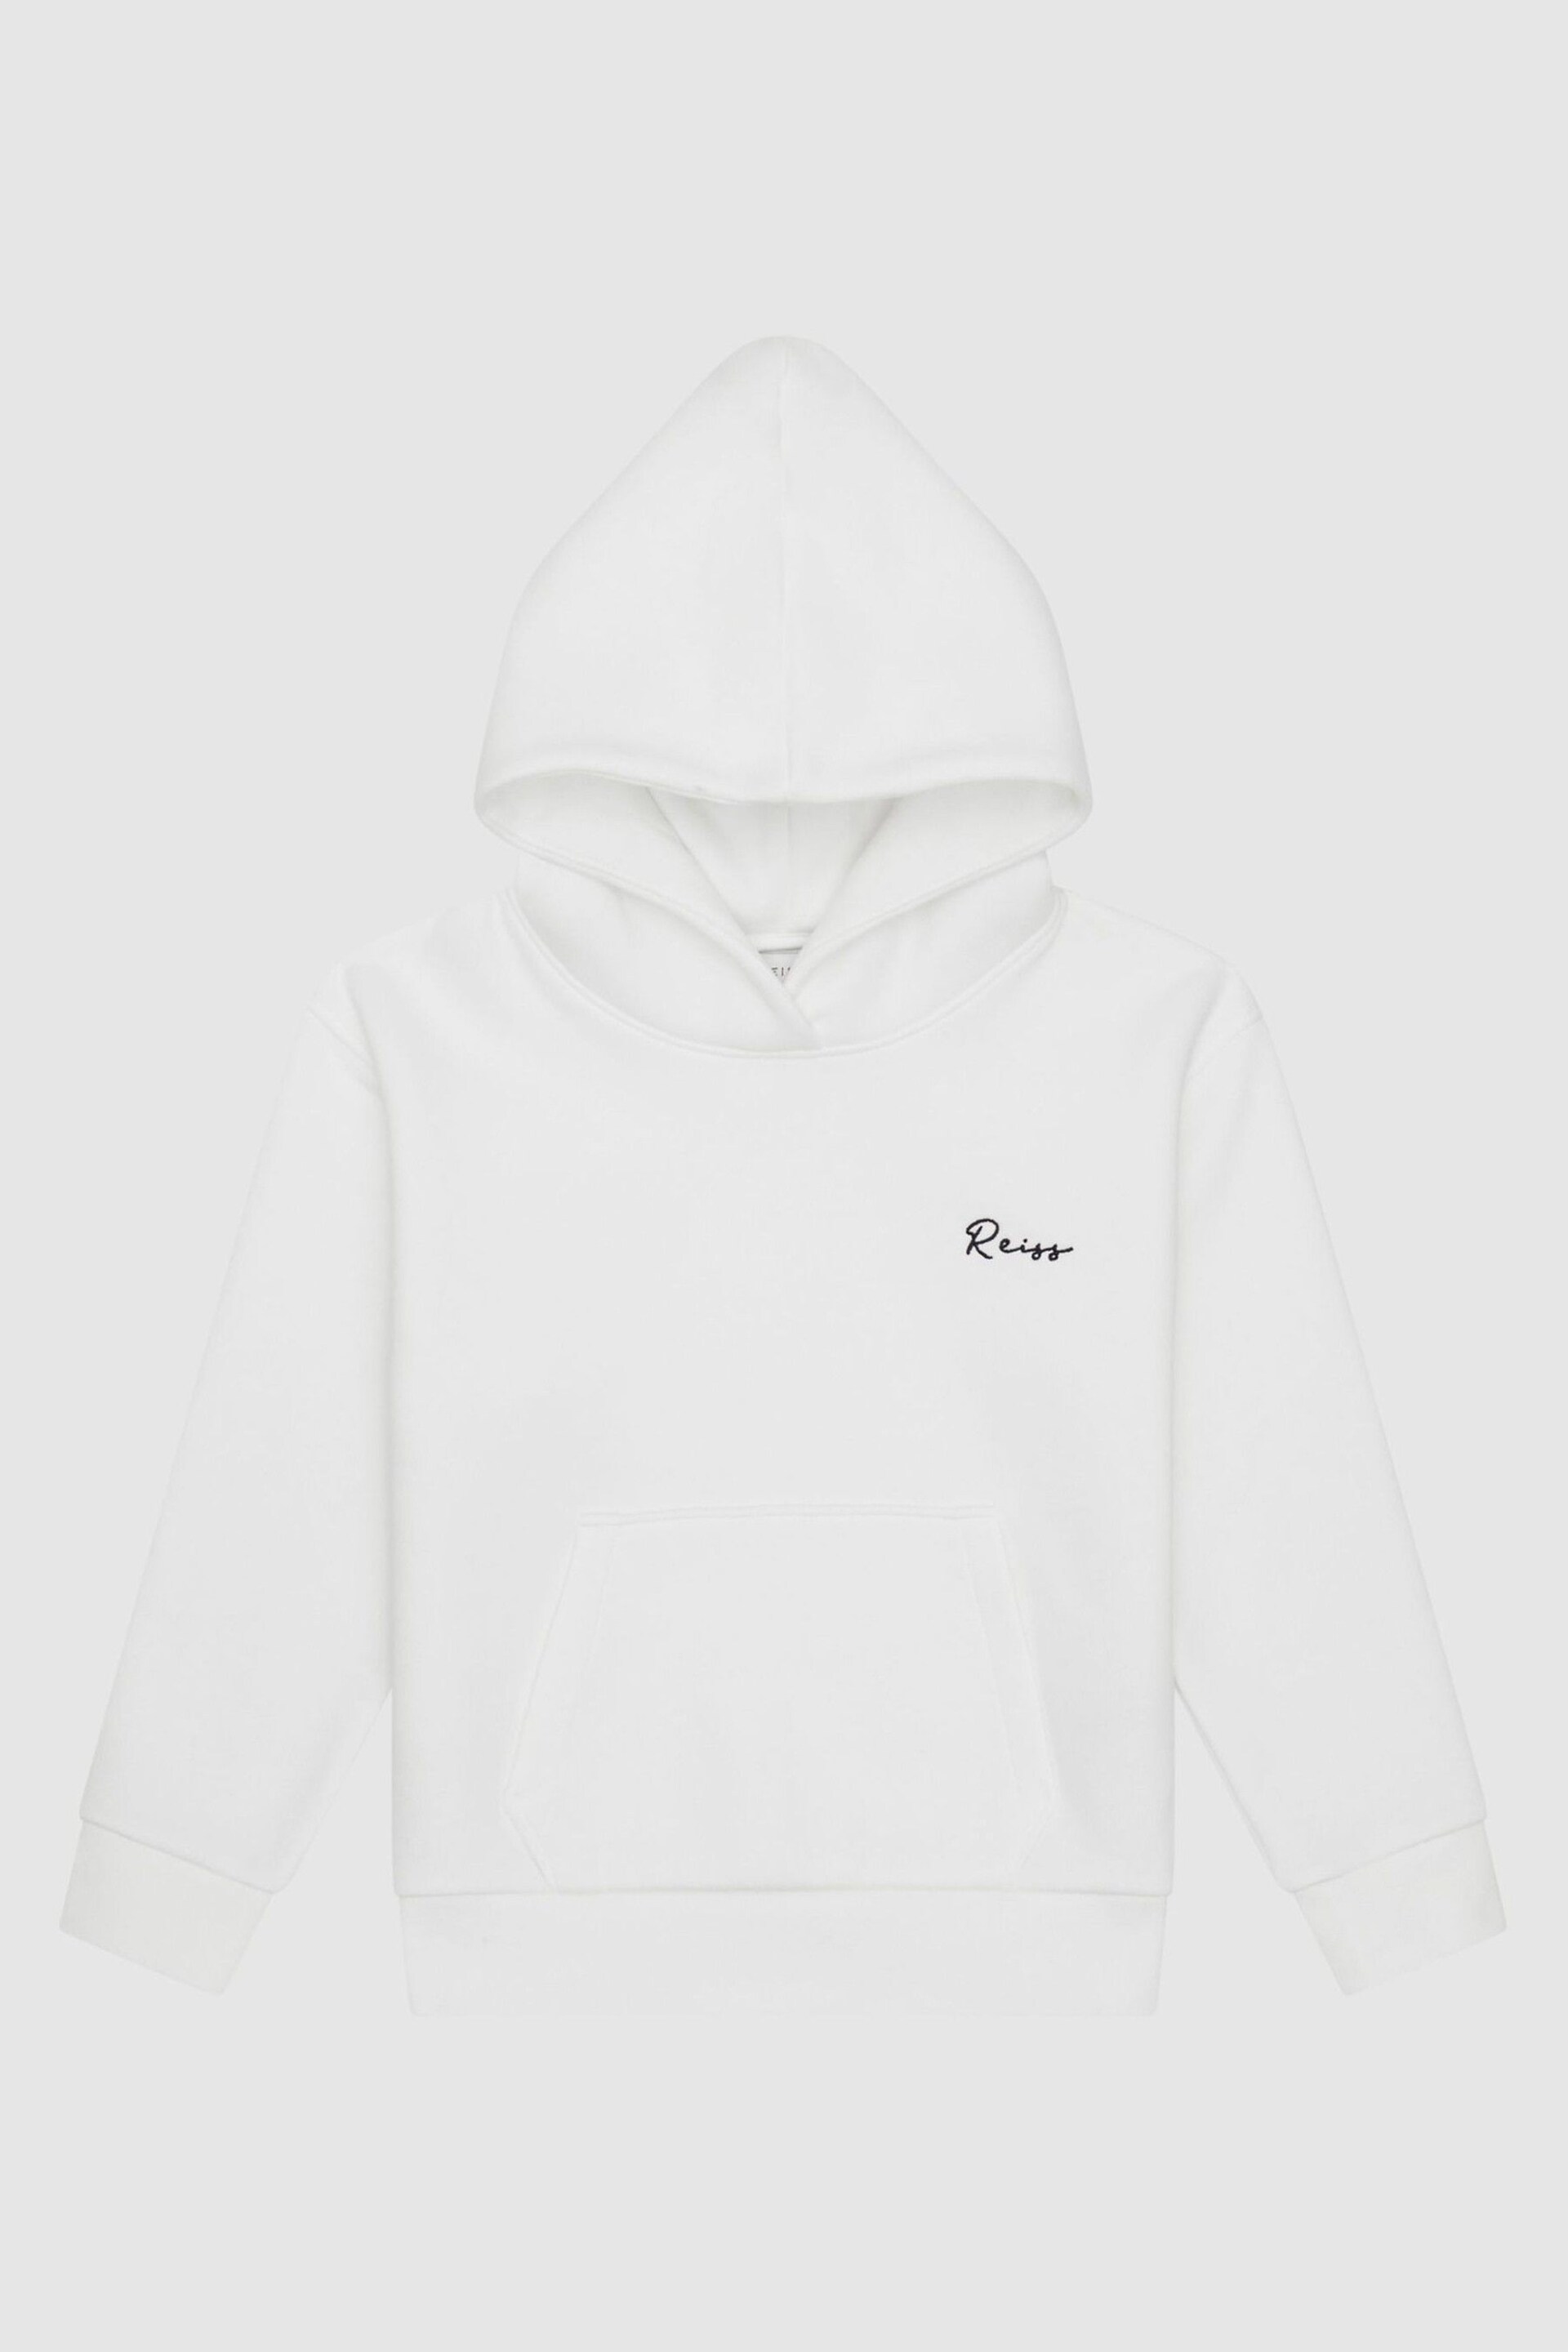 Reiss Ecru Connor Junior Embroidered Jersey Hoodie - Image 2 of 11